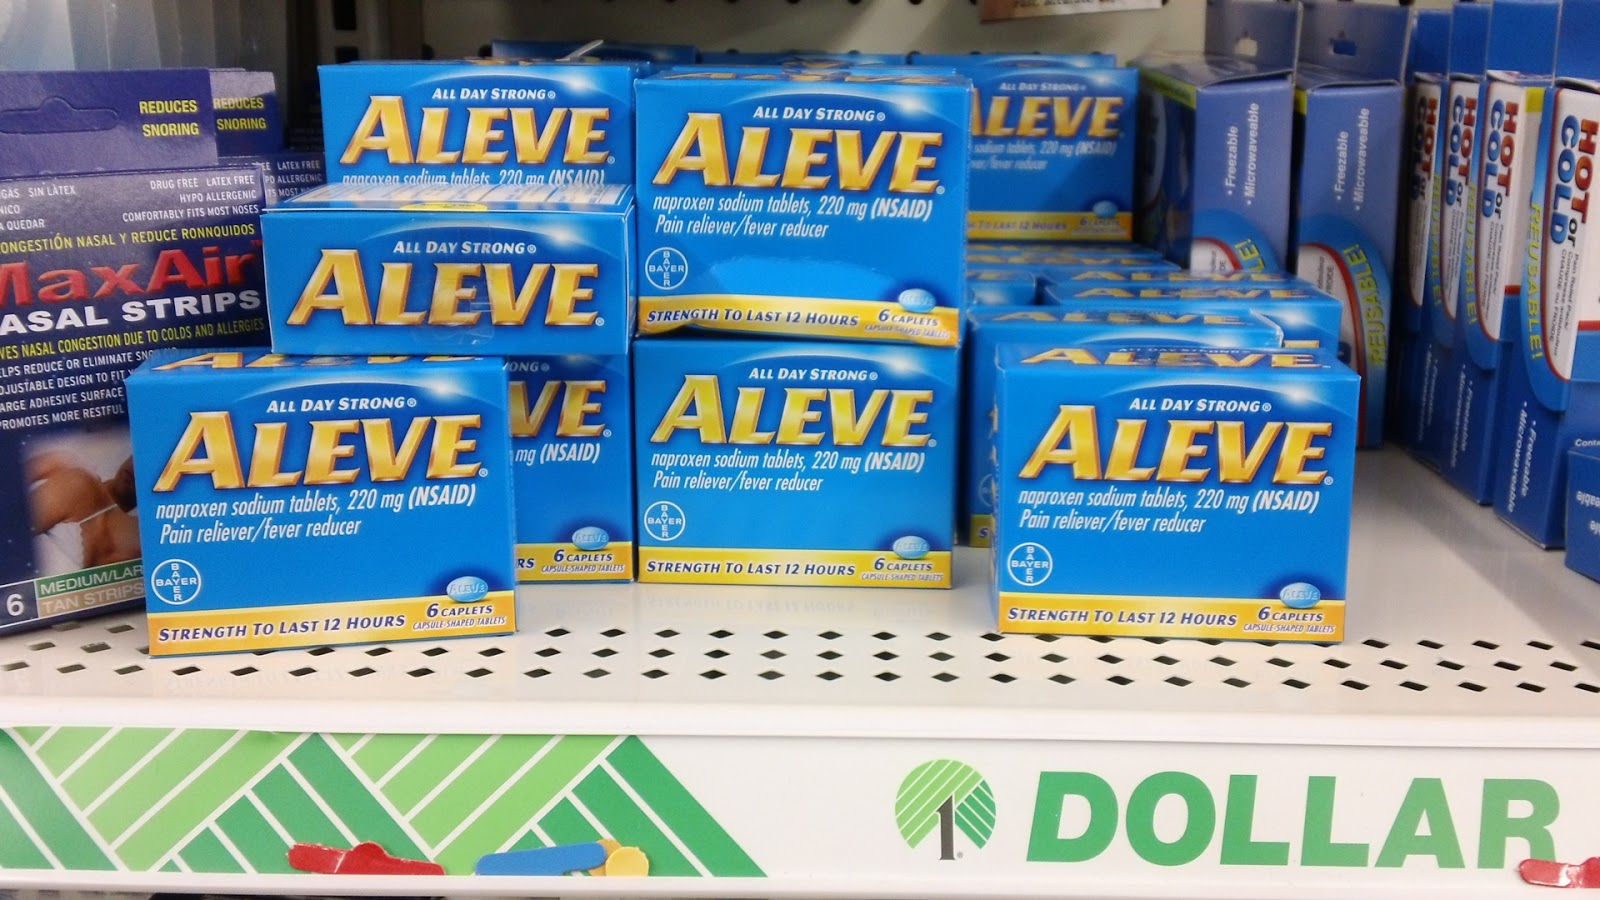 Extreme Couponing Mommy: FREE Aleve at the Dollar Tree1600 x 900